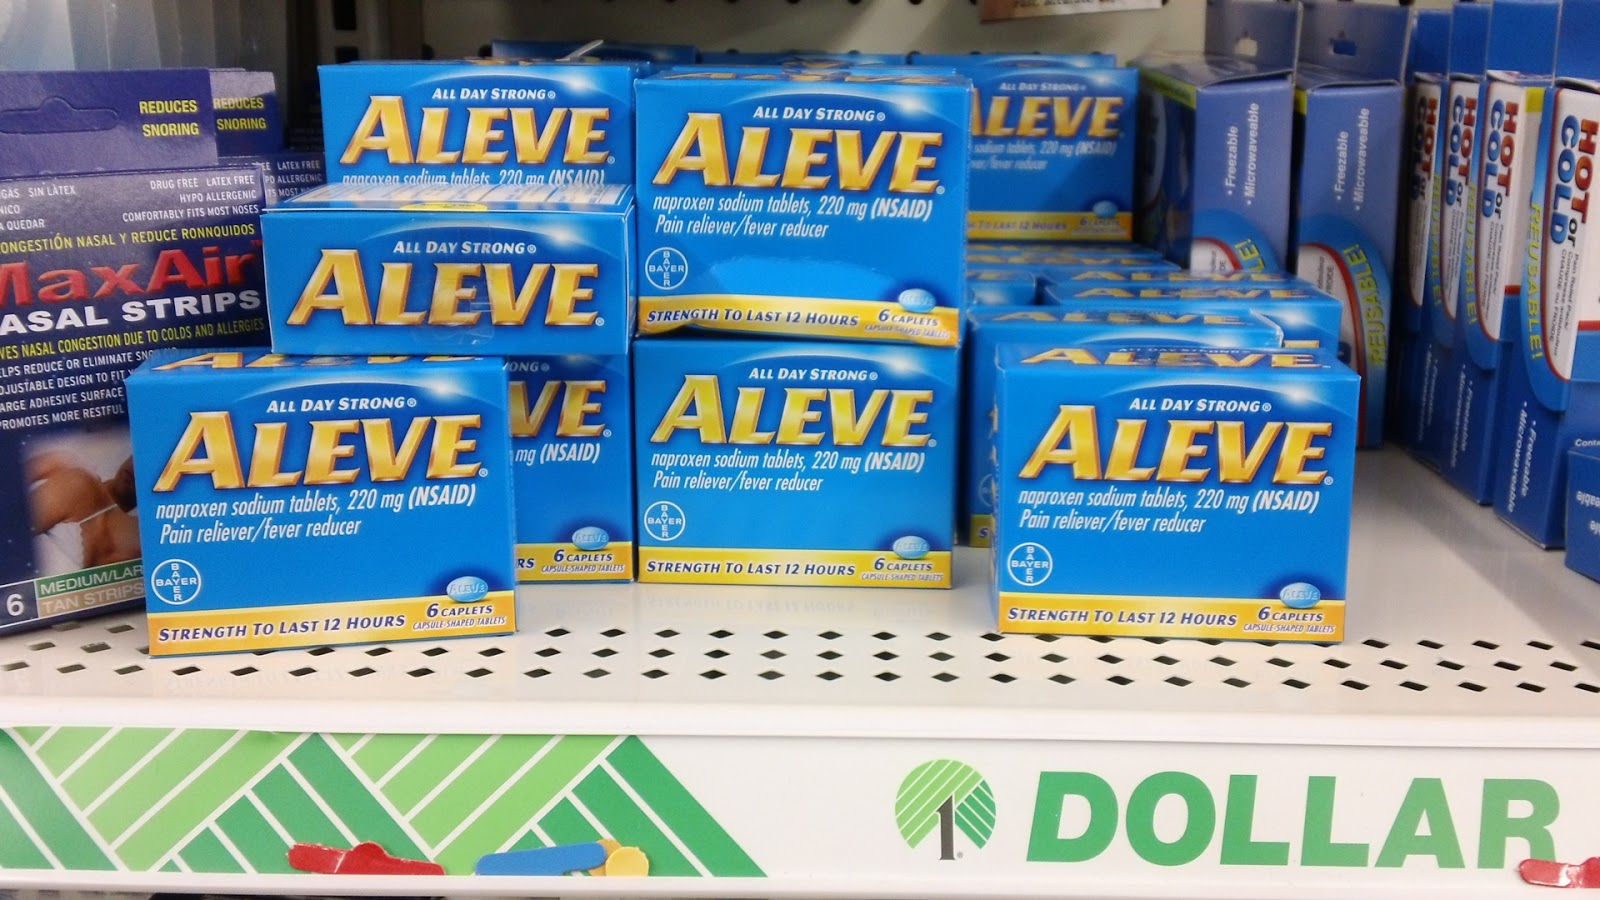 Extreme Couponing Mommy: FREE Aleve at the Dollar Tree1600 x 900